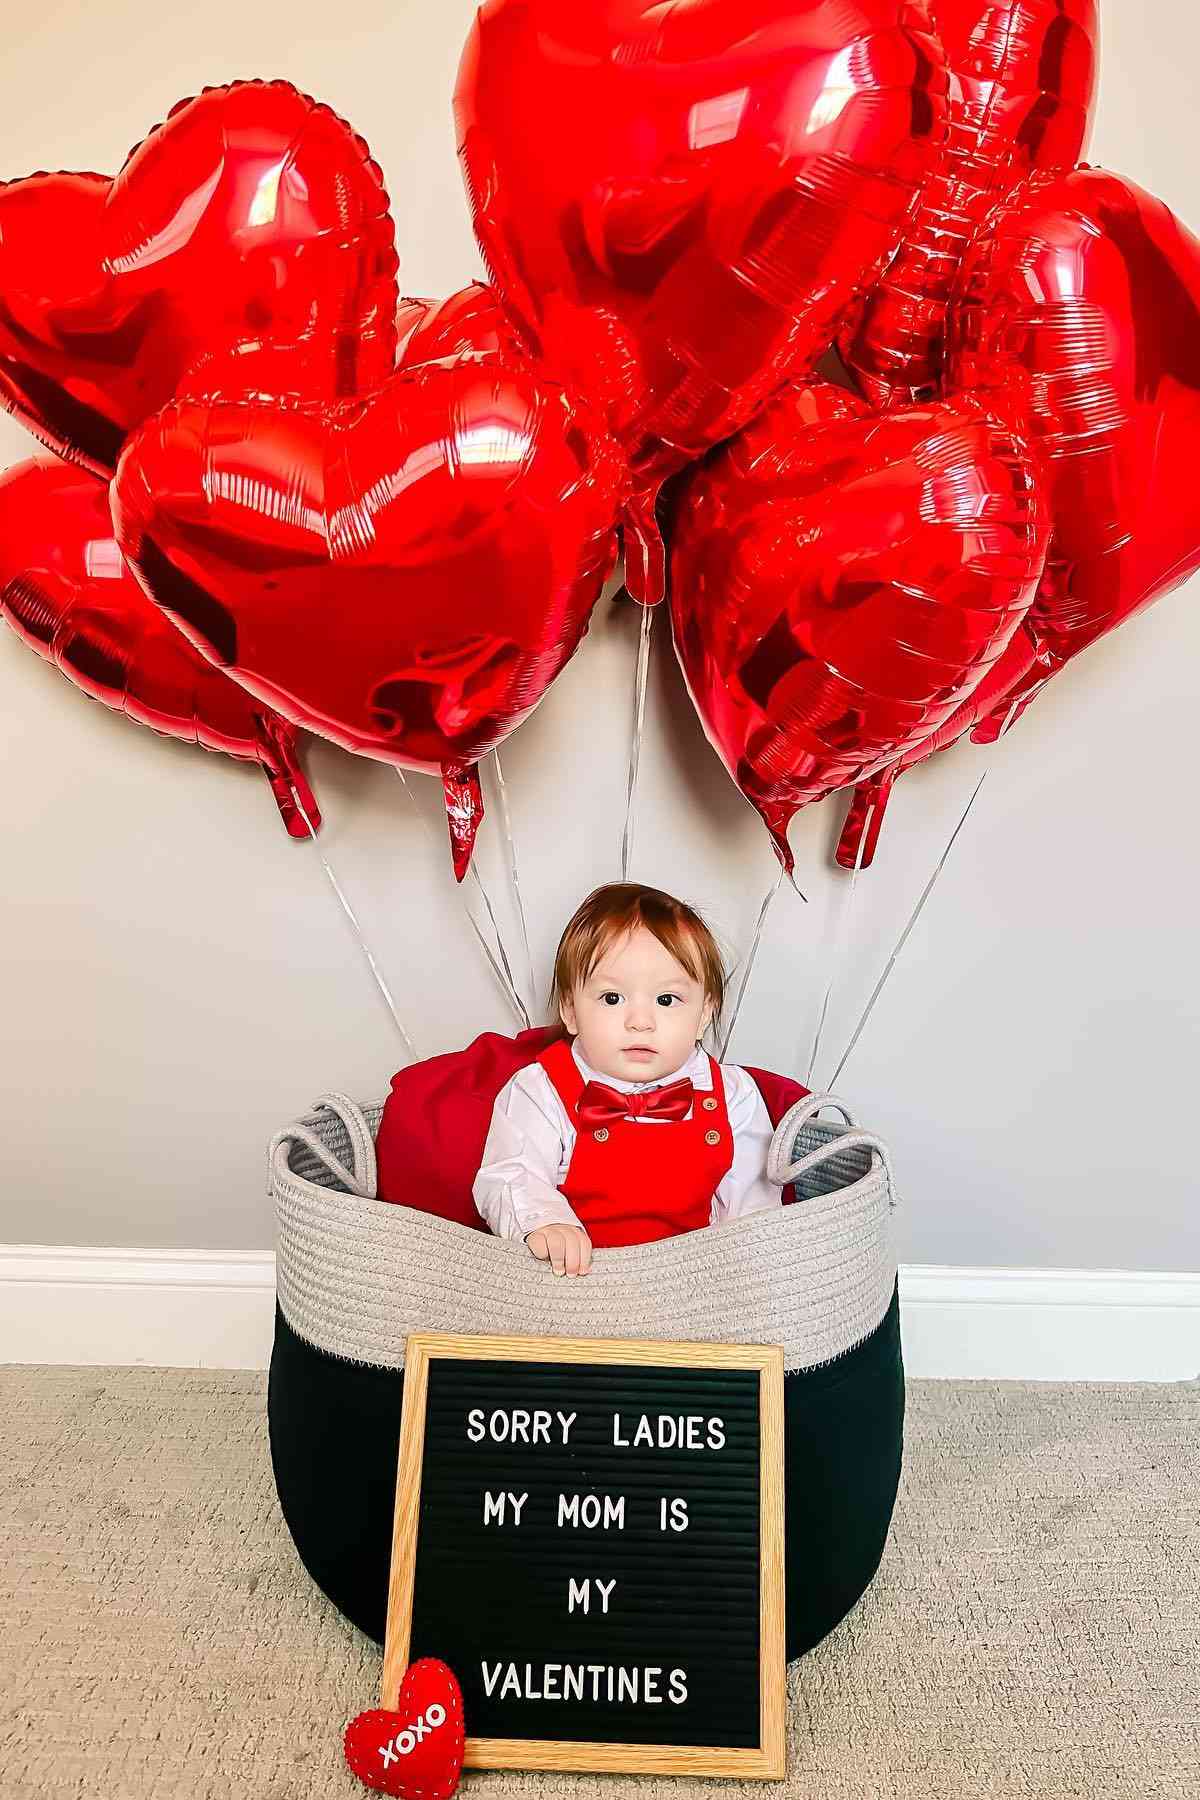 A baby sitting in a basket with heart balloons.